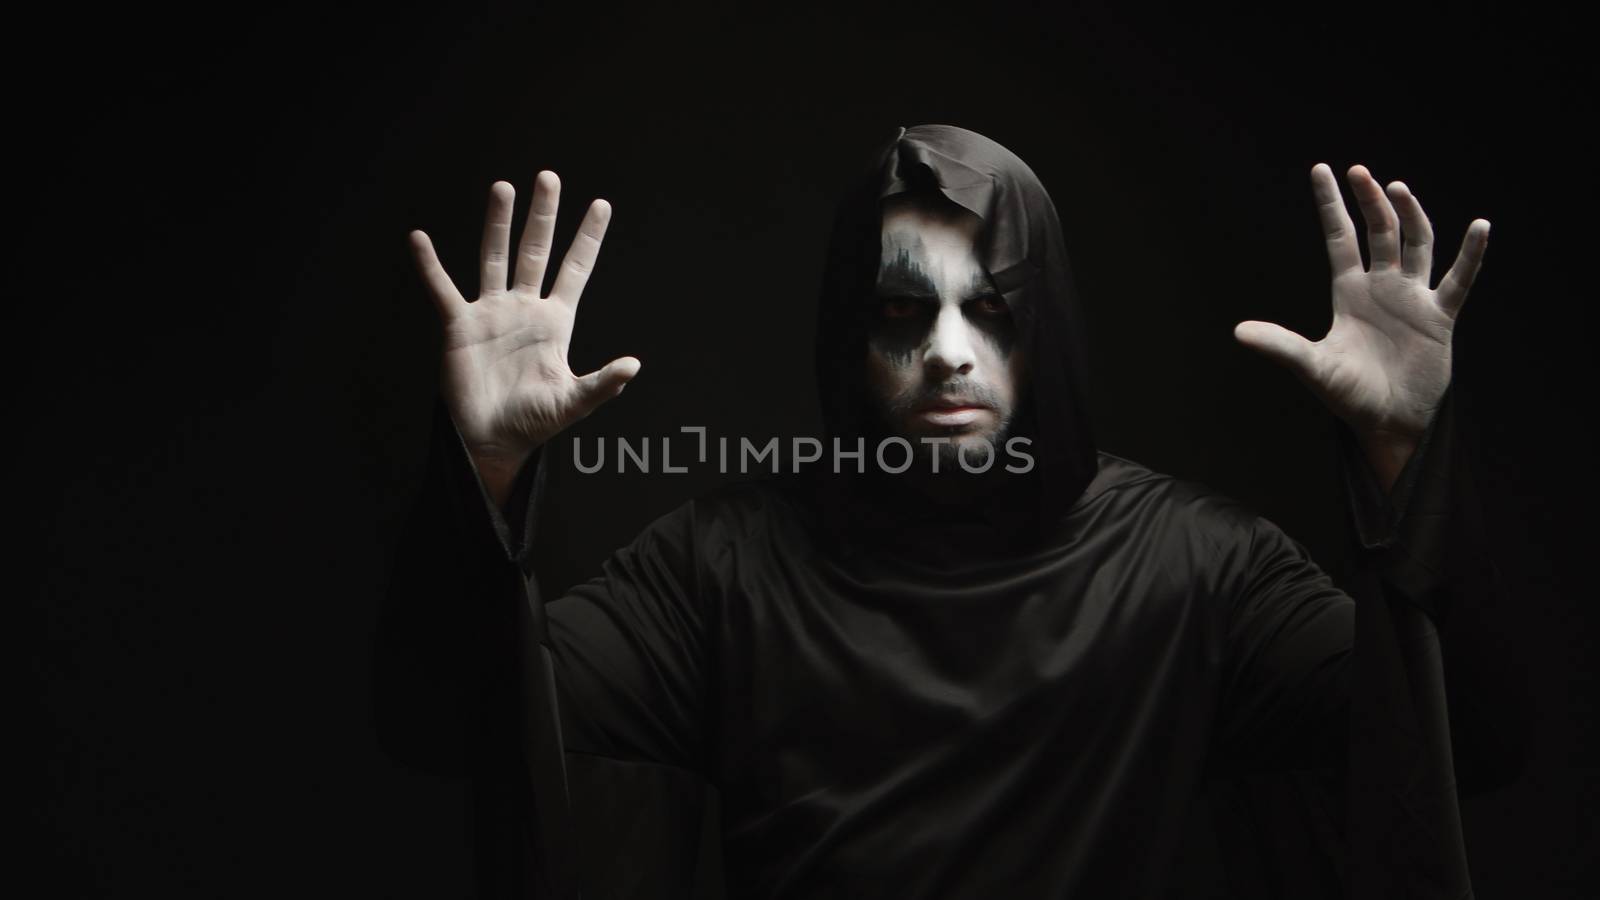 Young man with scary make up dressed up like grim reaper by DCStudio